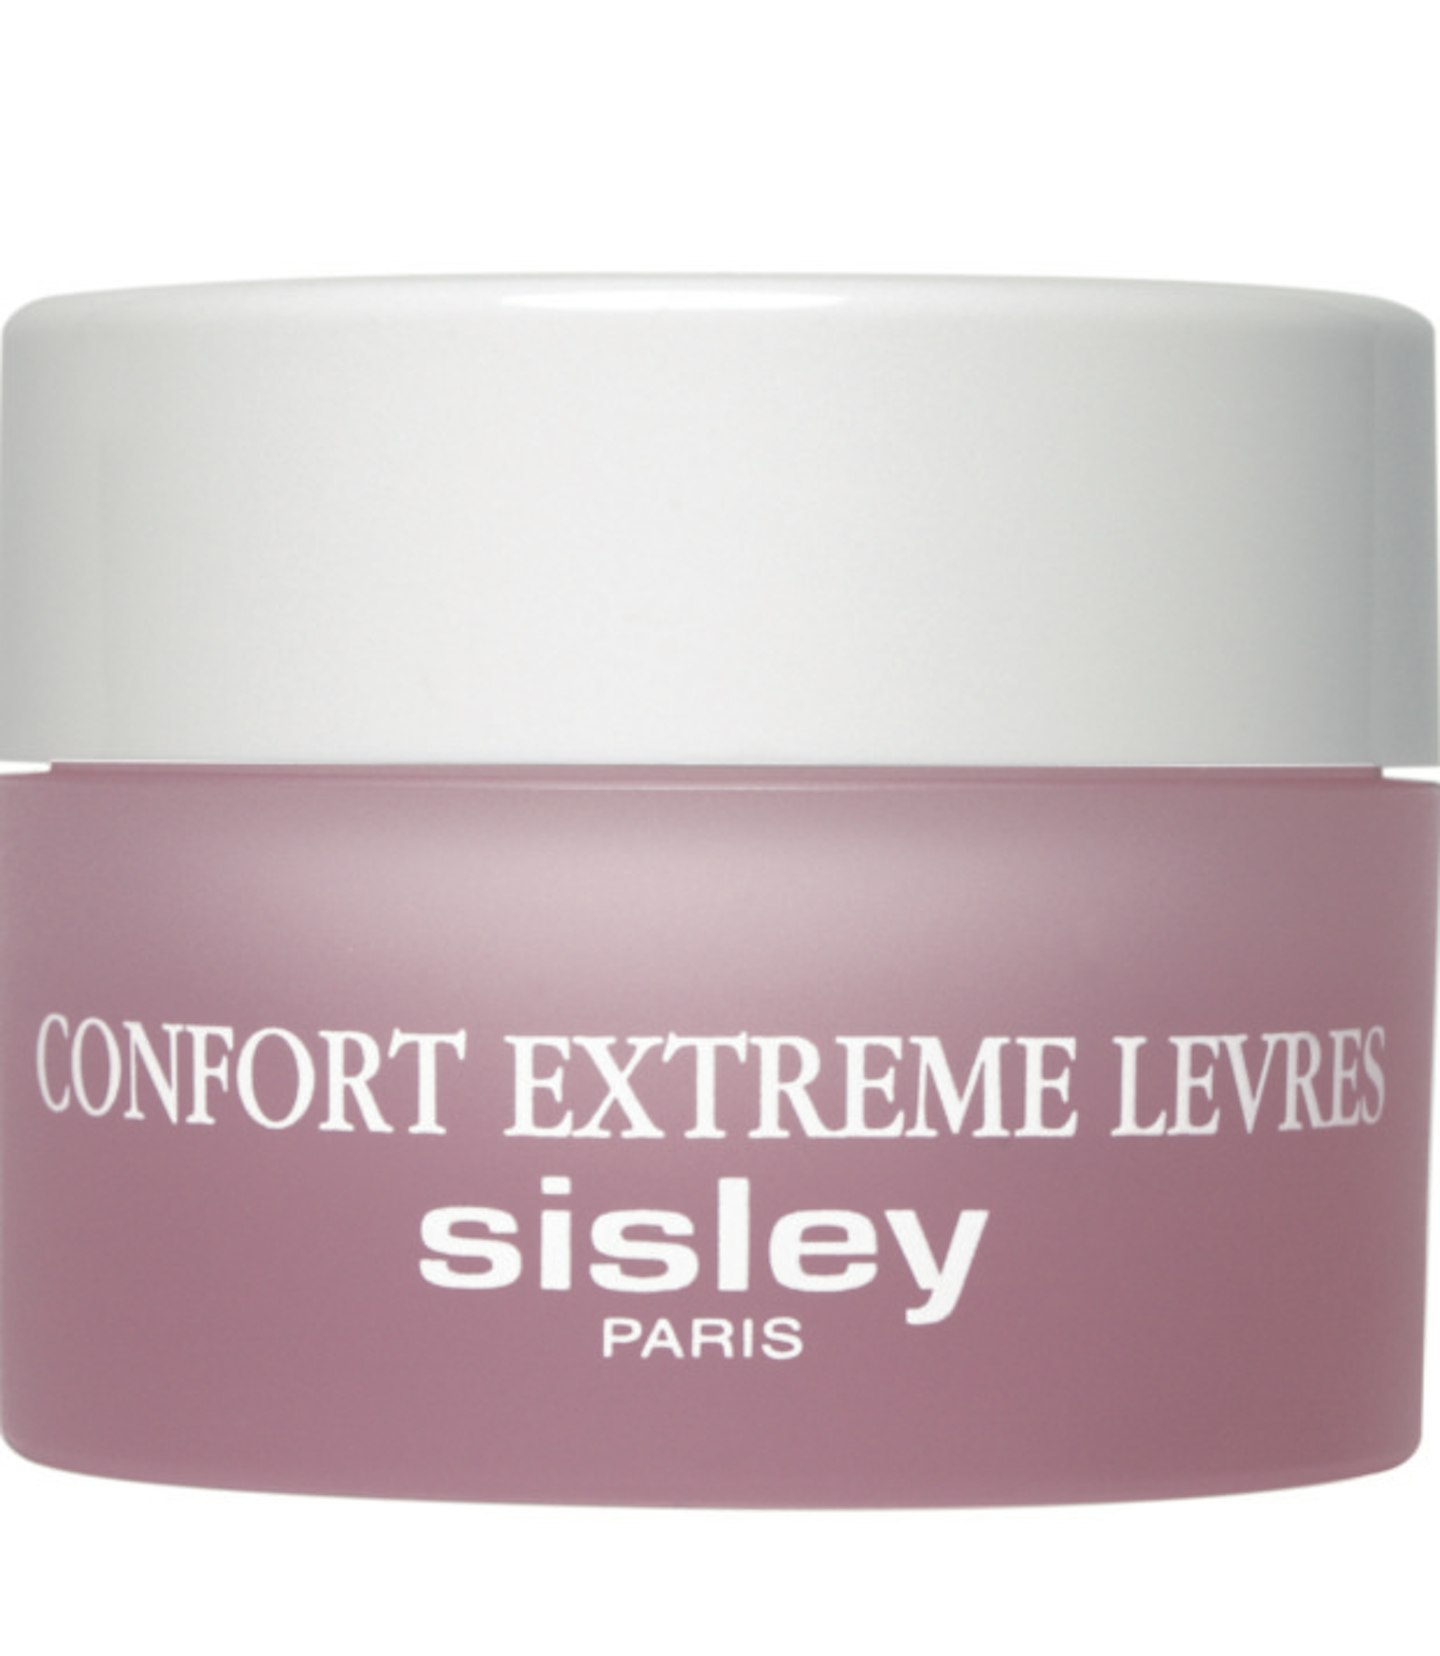 Adam: "You should always keep the lips hydrated. I use Sisley's Nutritive Lip Balm to hydrate Mel's Lips.